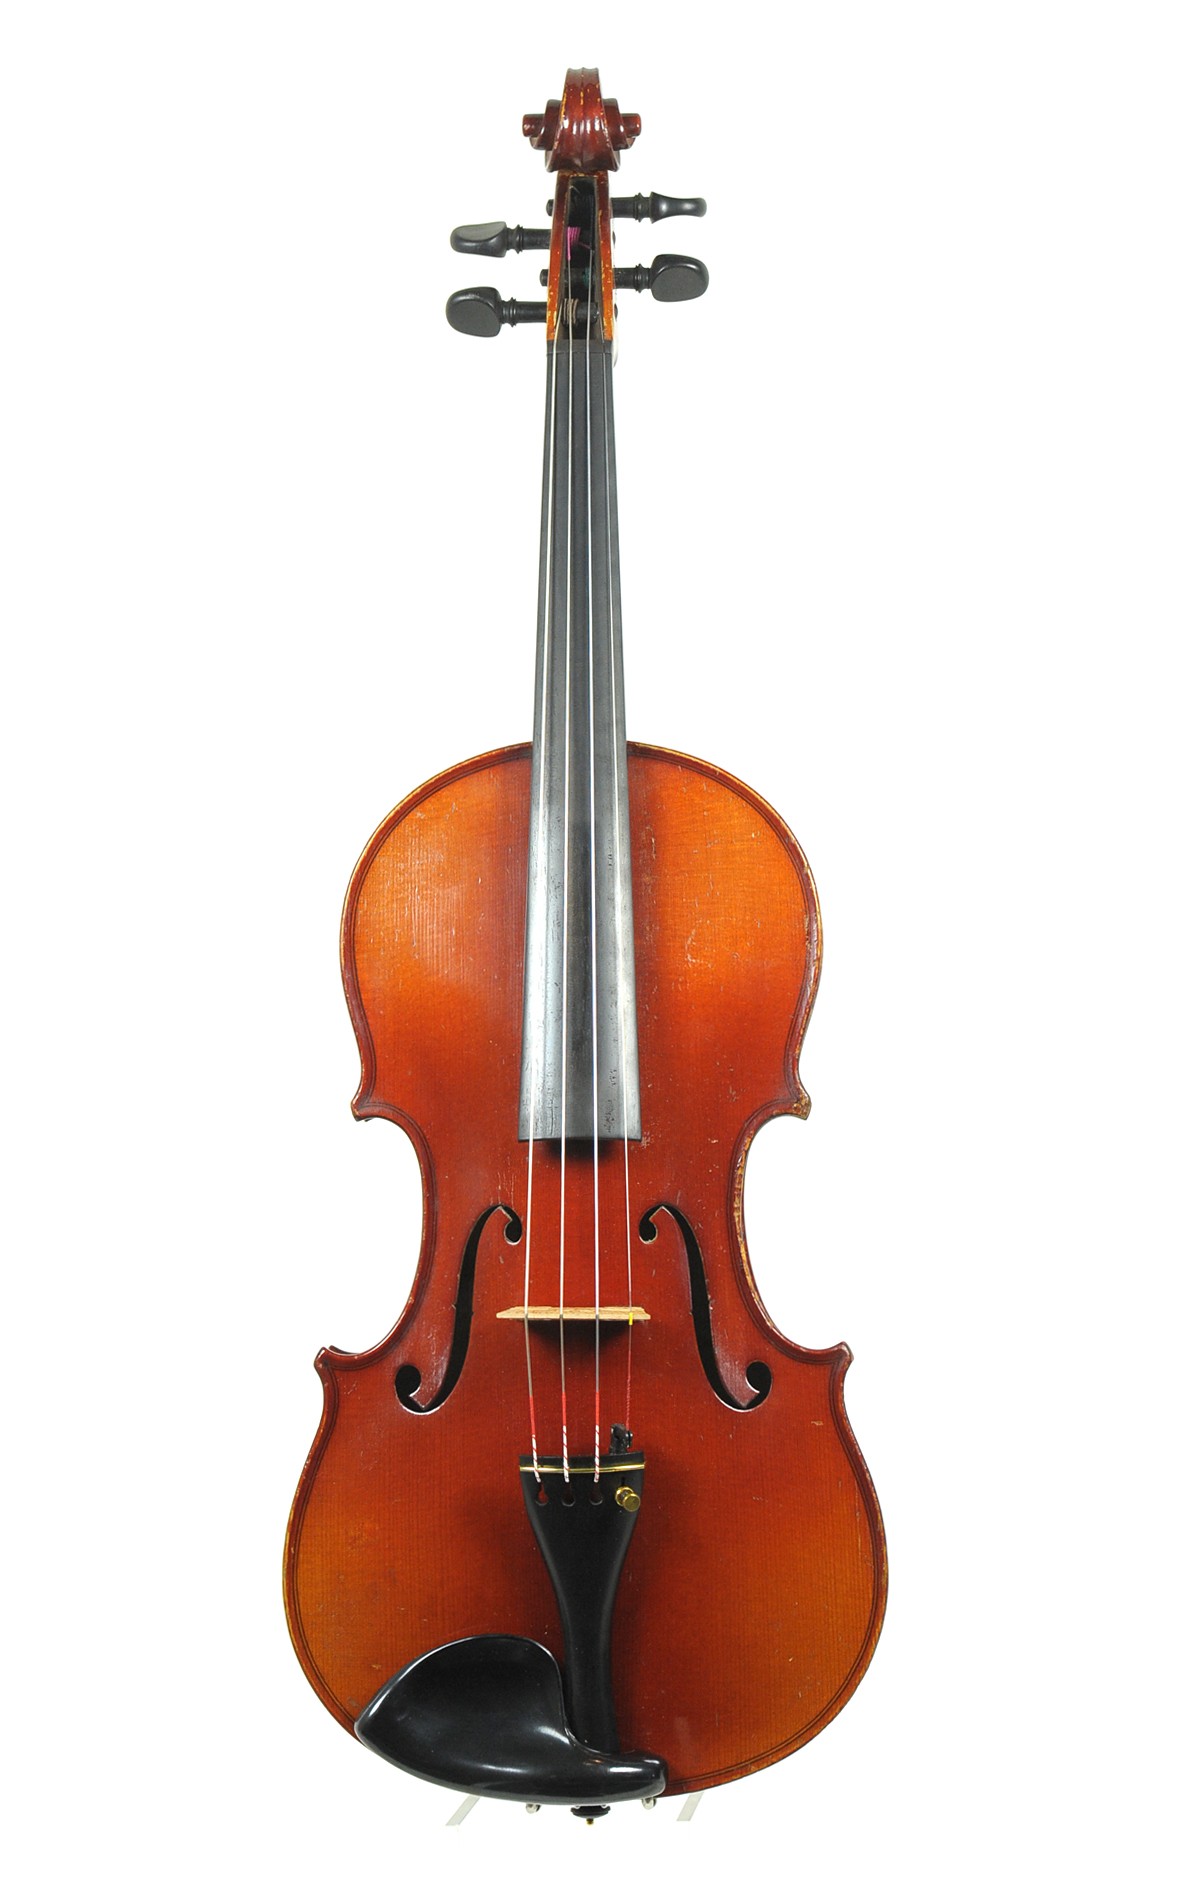 Fine violin from Saxony - top view